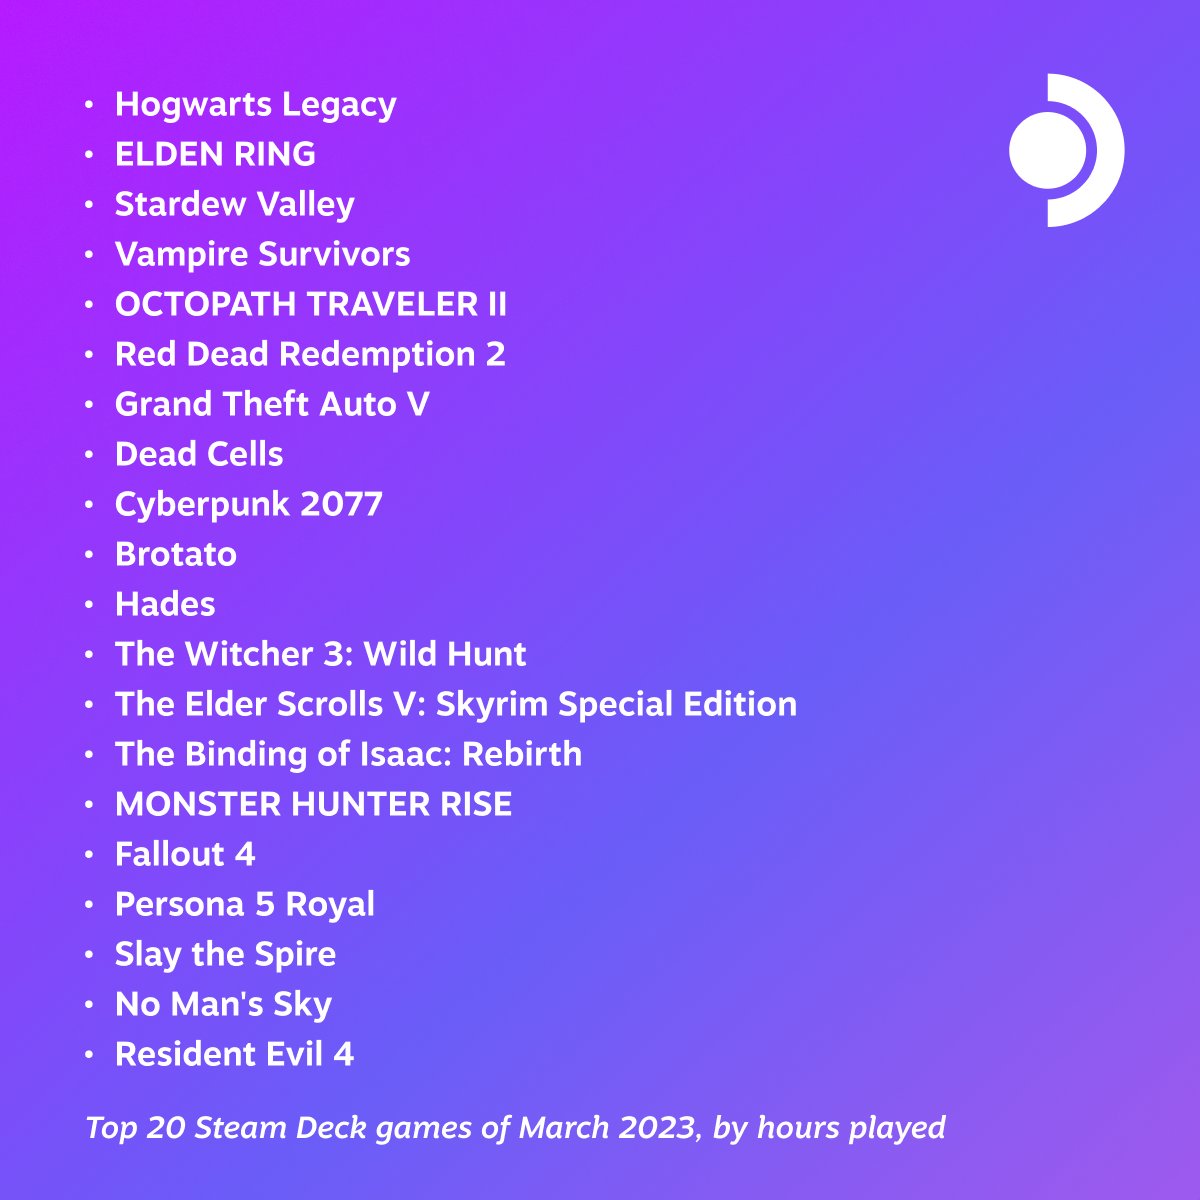 Top 20 Steam Deck games of March 2023, by hours played

Hogwarts Legacy
ELDEN RING
Stardew Valley
Vampire Survivors
OCTOPATH TRAVELER II
Red Dead Redemption 2
Grand Theft Auto V
Dead Cells
Cyberpunk 2077
Brotato
Hades
The Witcher 3: Wild Hunt
The Elder Scrolls V: Skyrim Special Edition
The Binding of Isaac: Rebirth
MONSTER HUNTER RISE
Fallout 4
Persona 5 Royal
Slay the Spire
No Man's Sky
Resident Evil 4